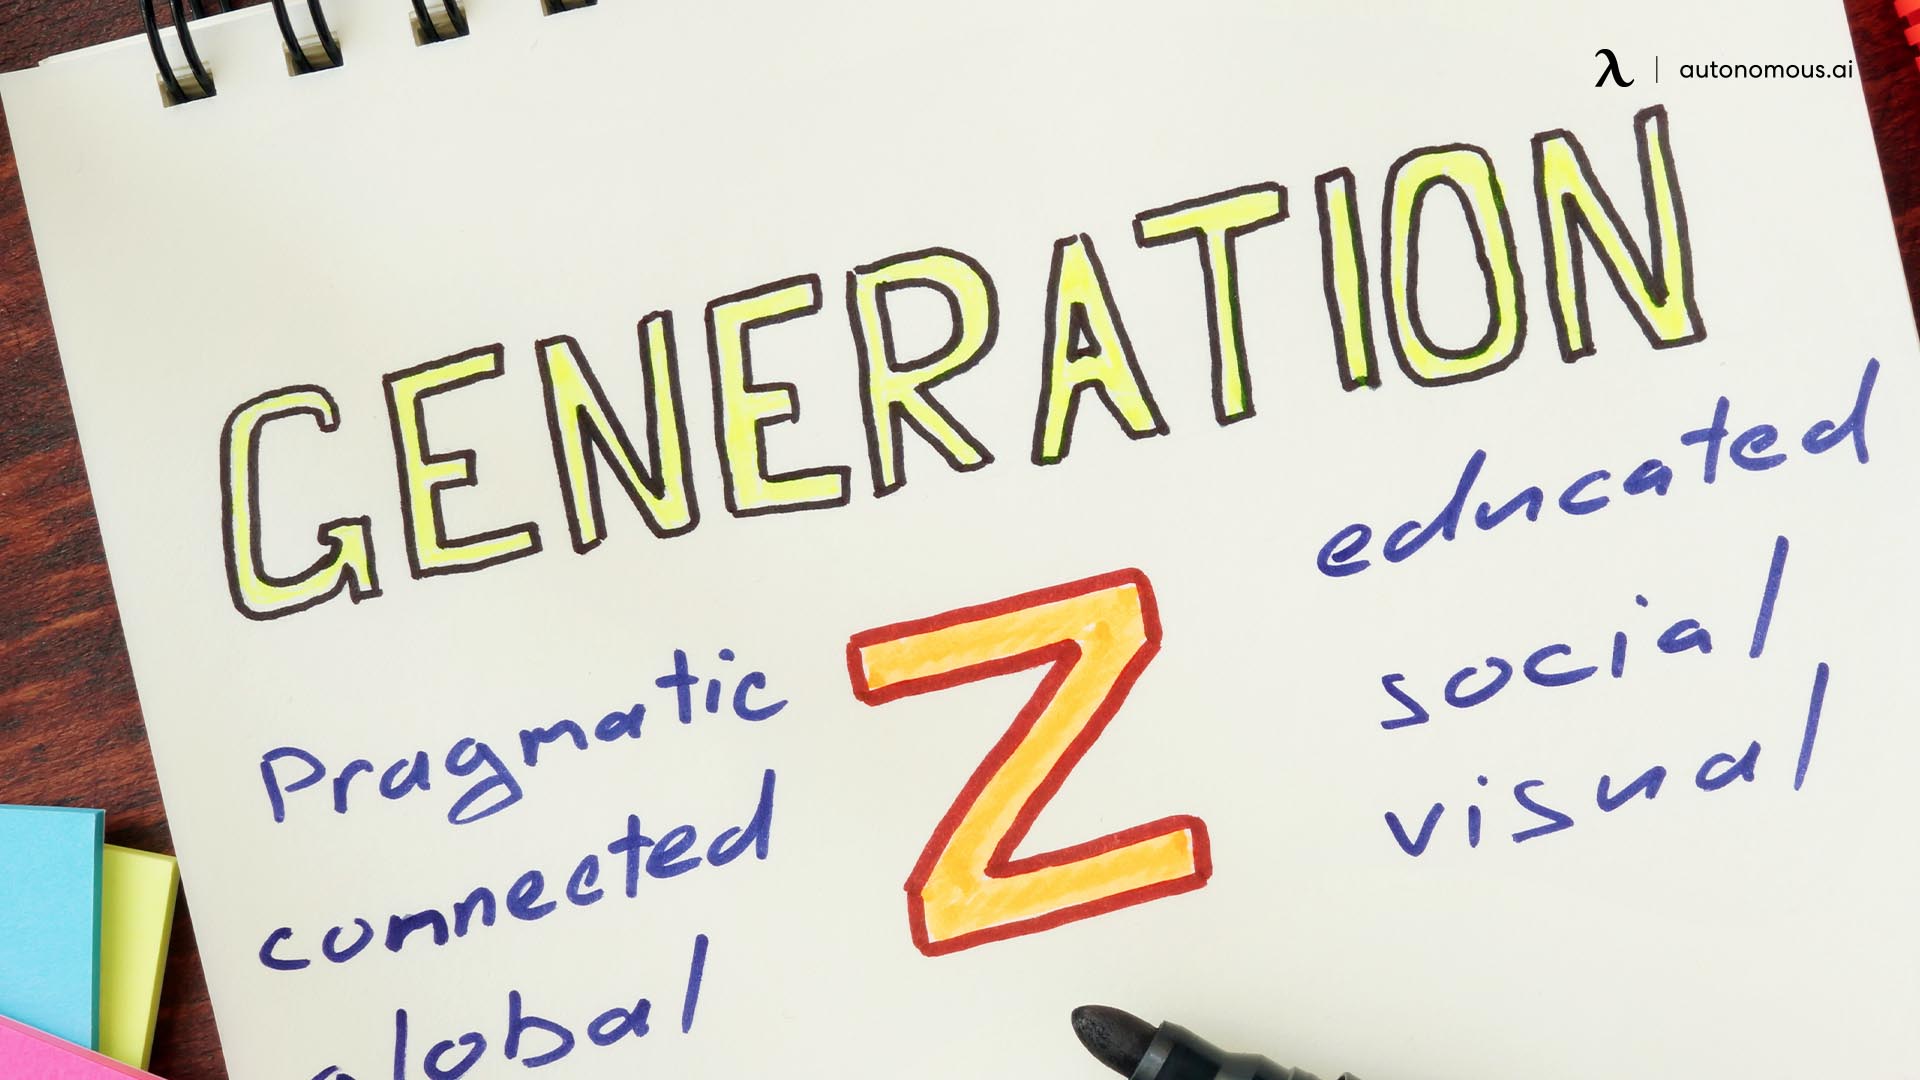 What Are the Values of the Generation Z and Generation Z Characteristics?